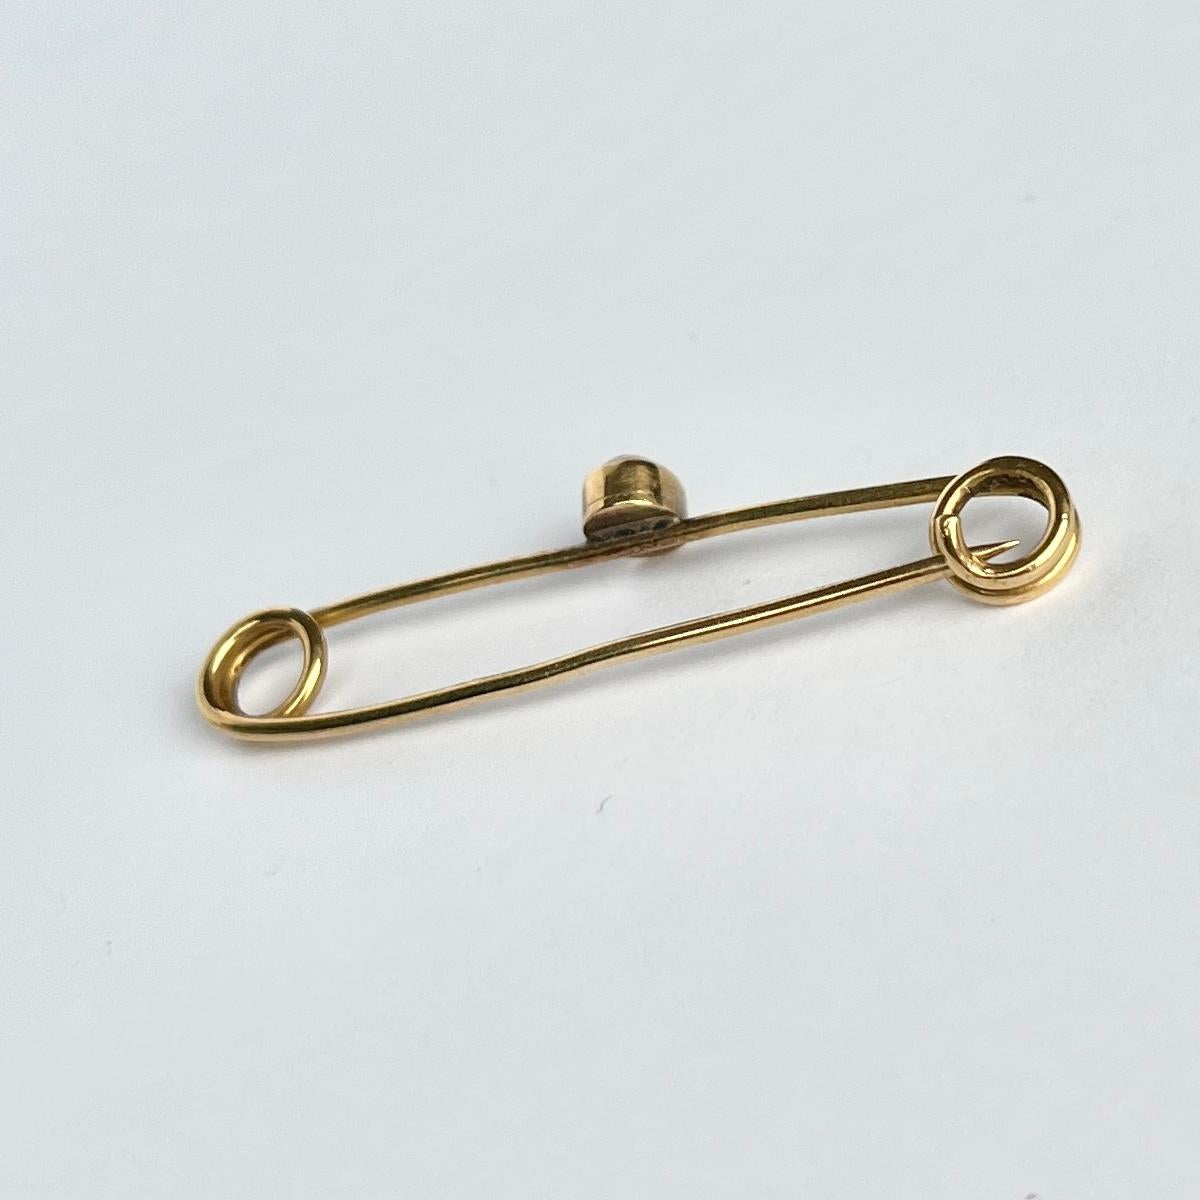 Edwardian Opal 9 Carat Gold Pin Brooch In Good Condition For Sale In Chipping Campden, GB